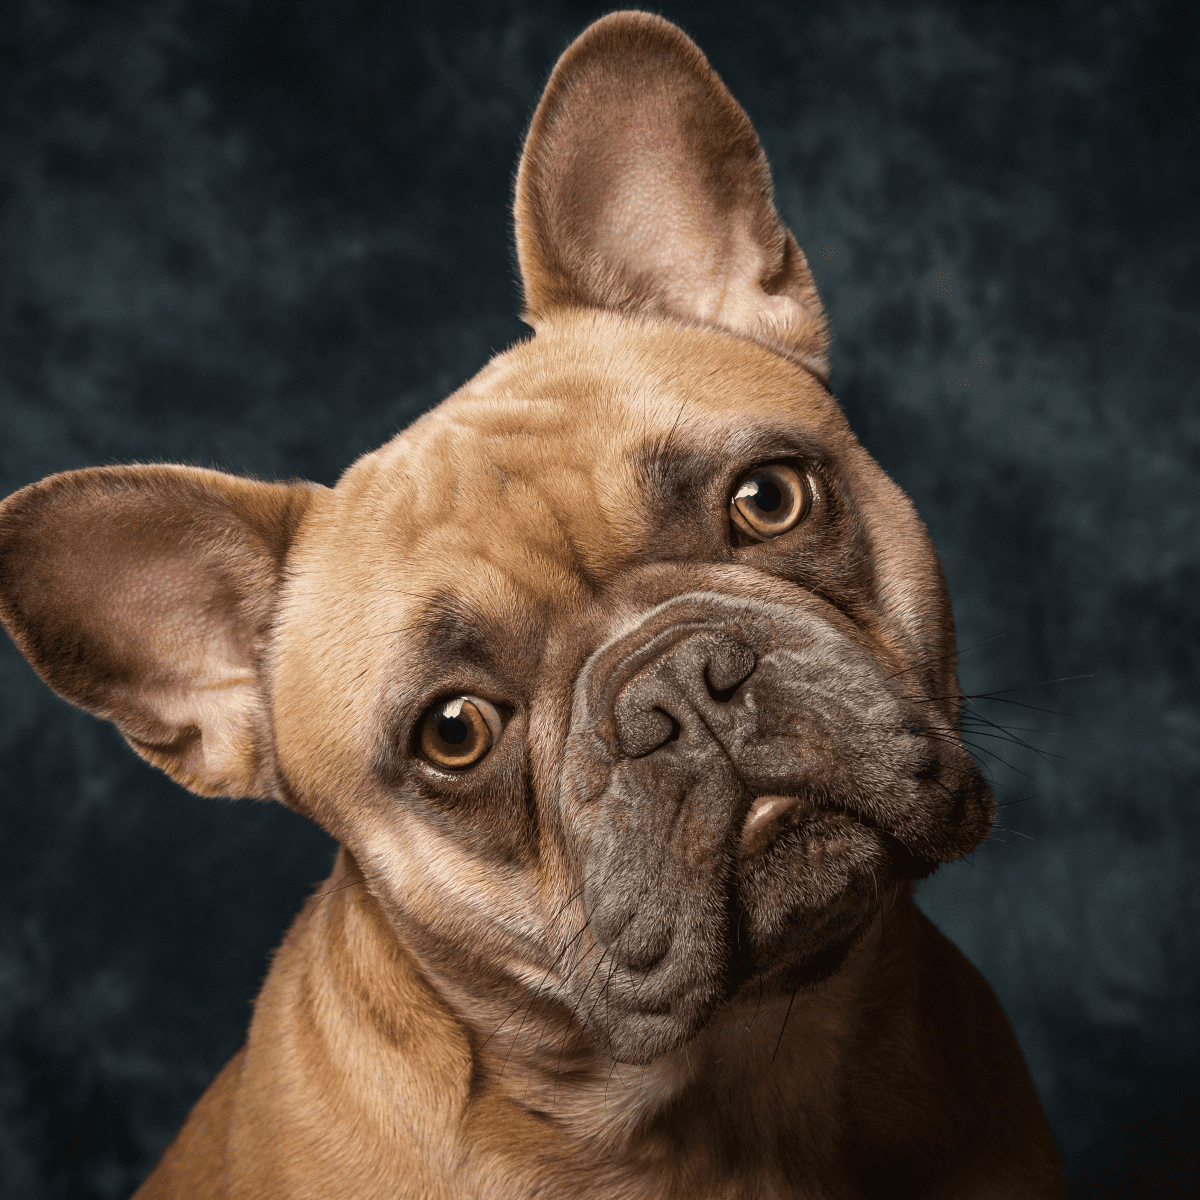 https://images.saymedia-content.com/.image/ar_1:1%2Cc_fill%2Ccs_srgb%2Cq_auto:eco%2Cw_1200/MTk3MjE5Nzc3Mjg5MTM1MTg3/the-french-bulldog-a-guide-for-owners.png